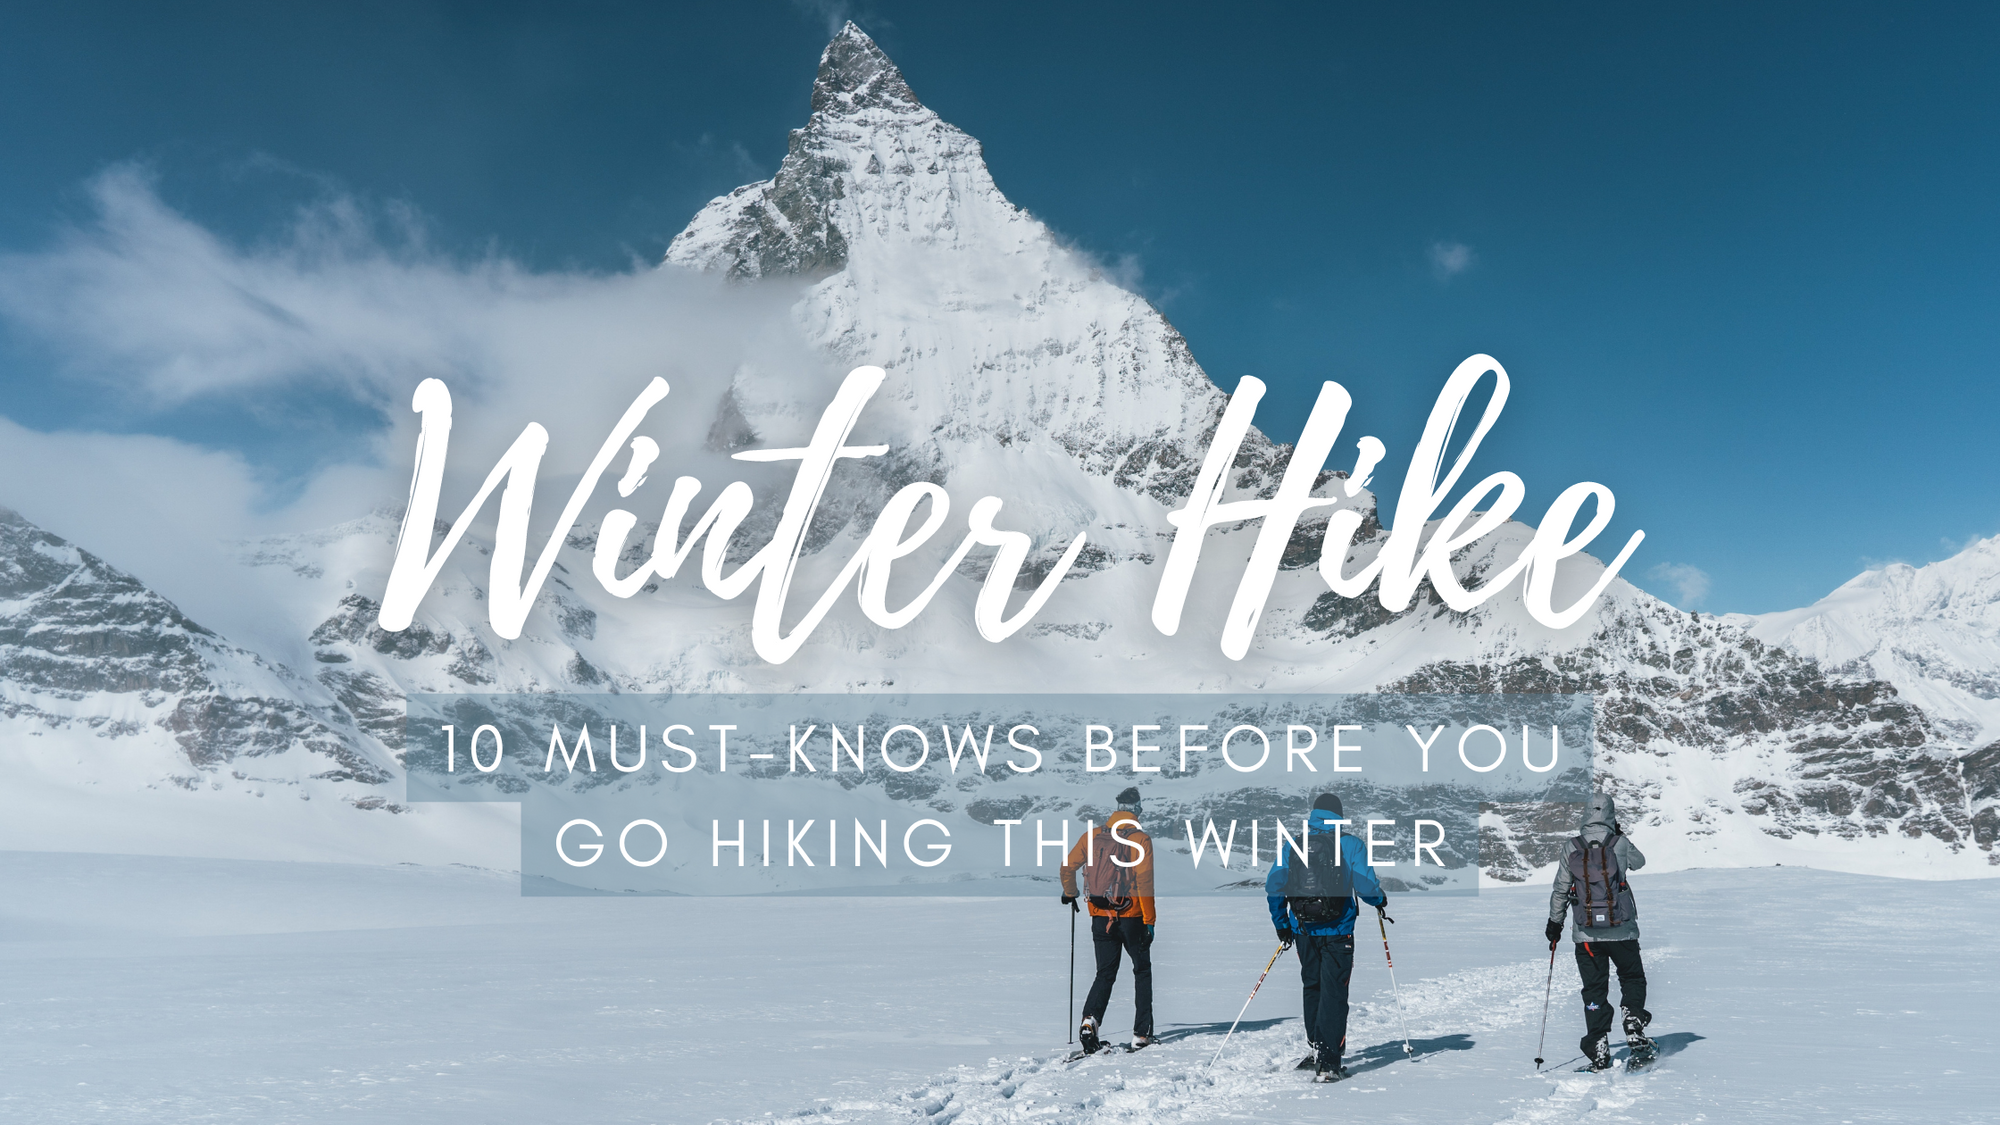 10 Essential Tips for Winter Hiking in the Mountains